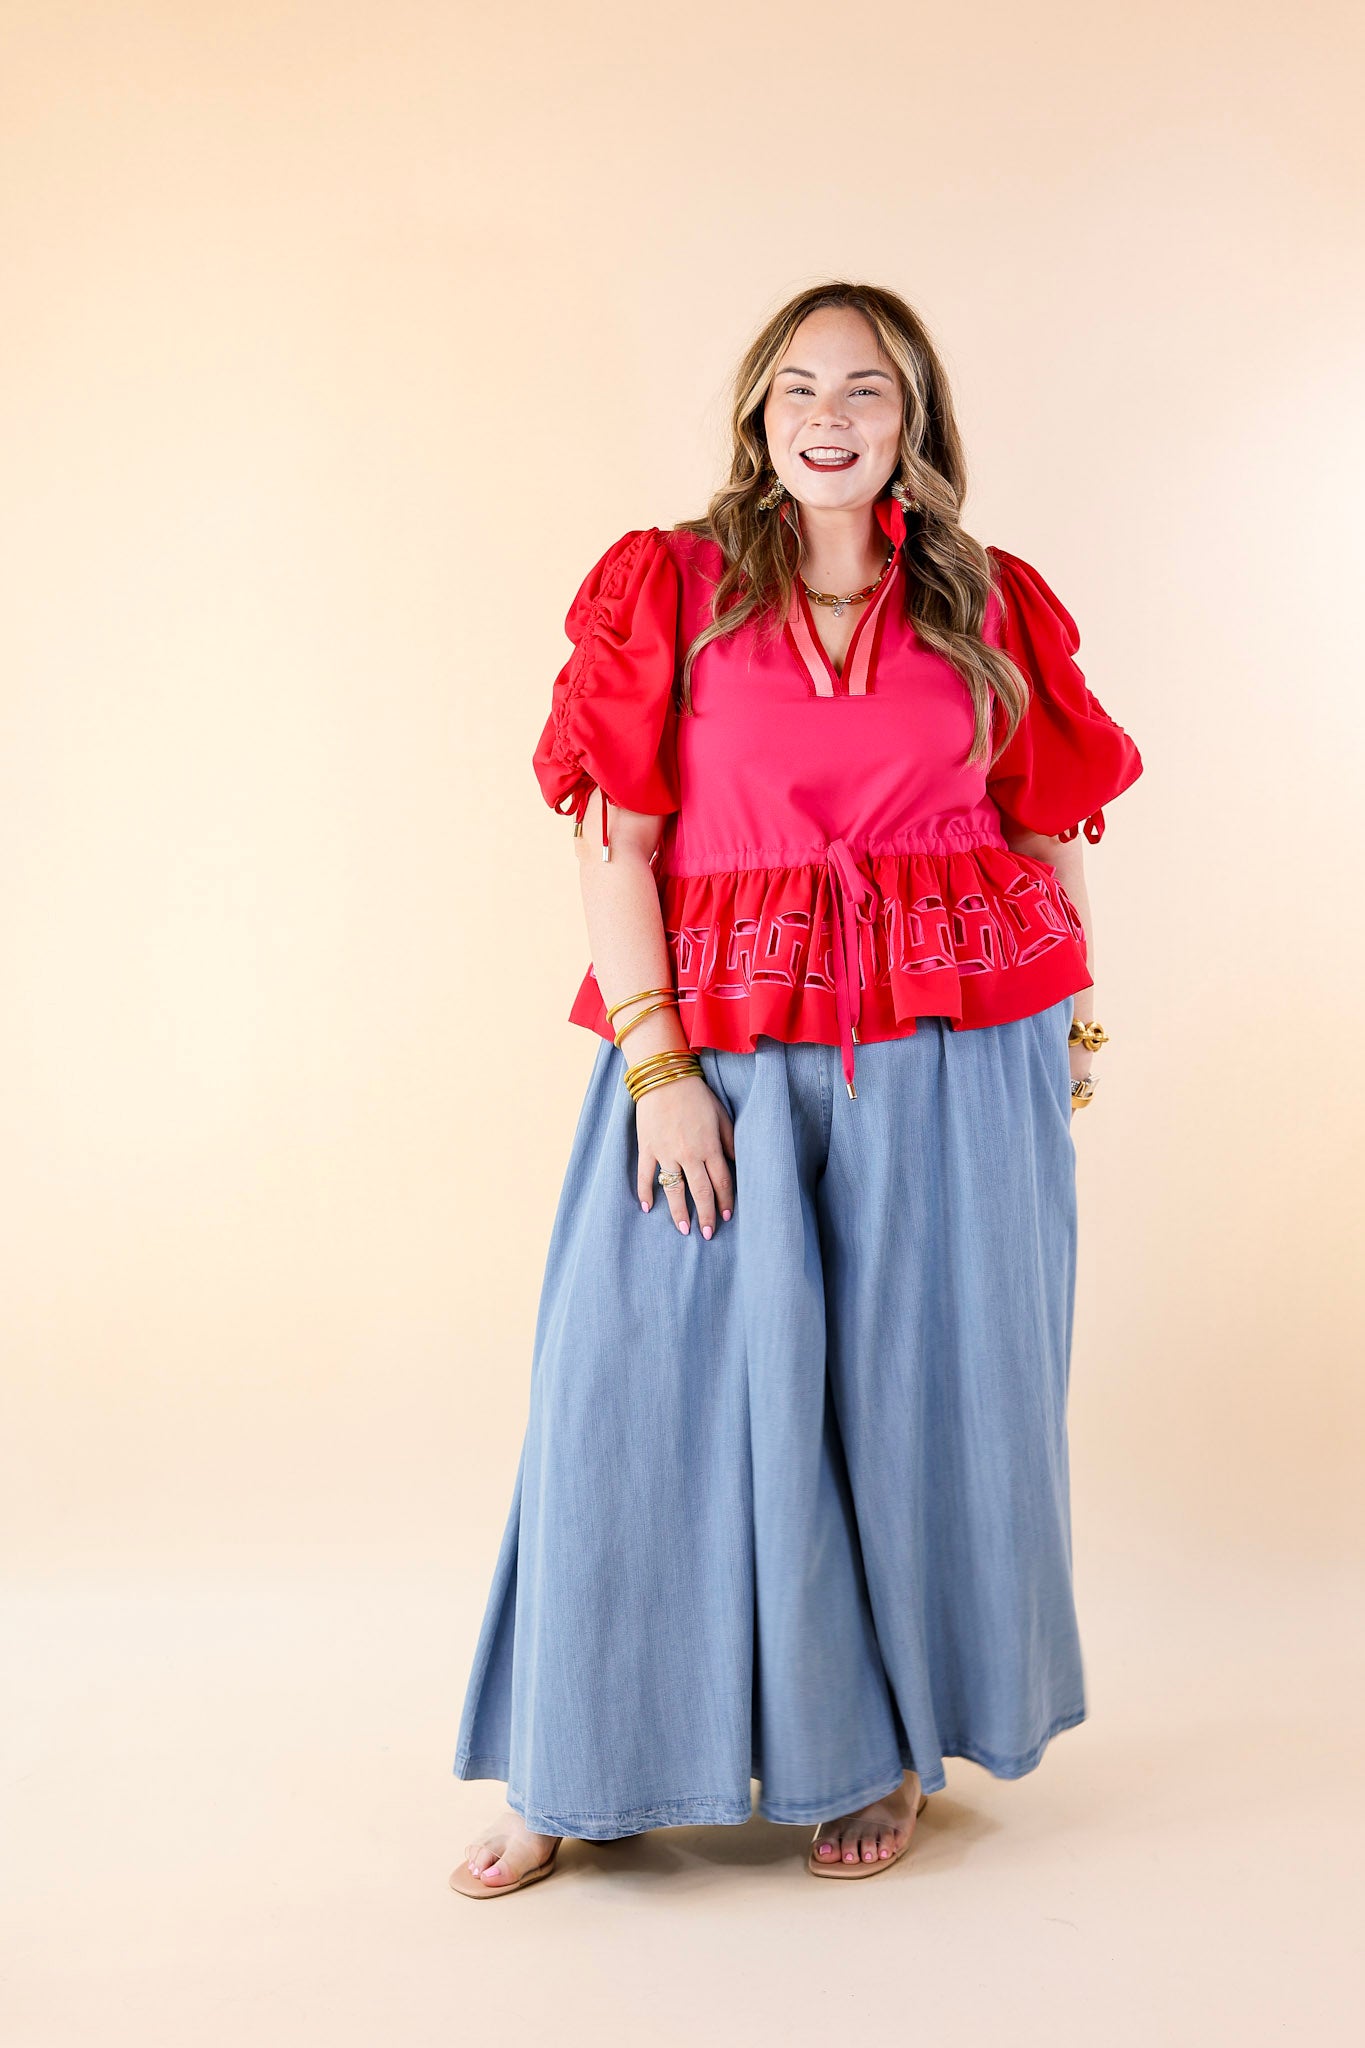 Emily McCarthy | Palazzo Pant in Denim - Giddy Up Glamour Boutique